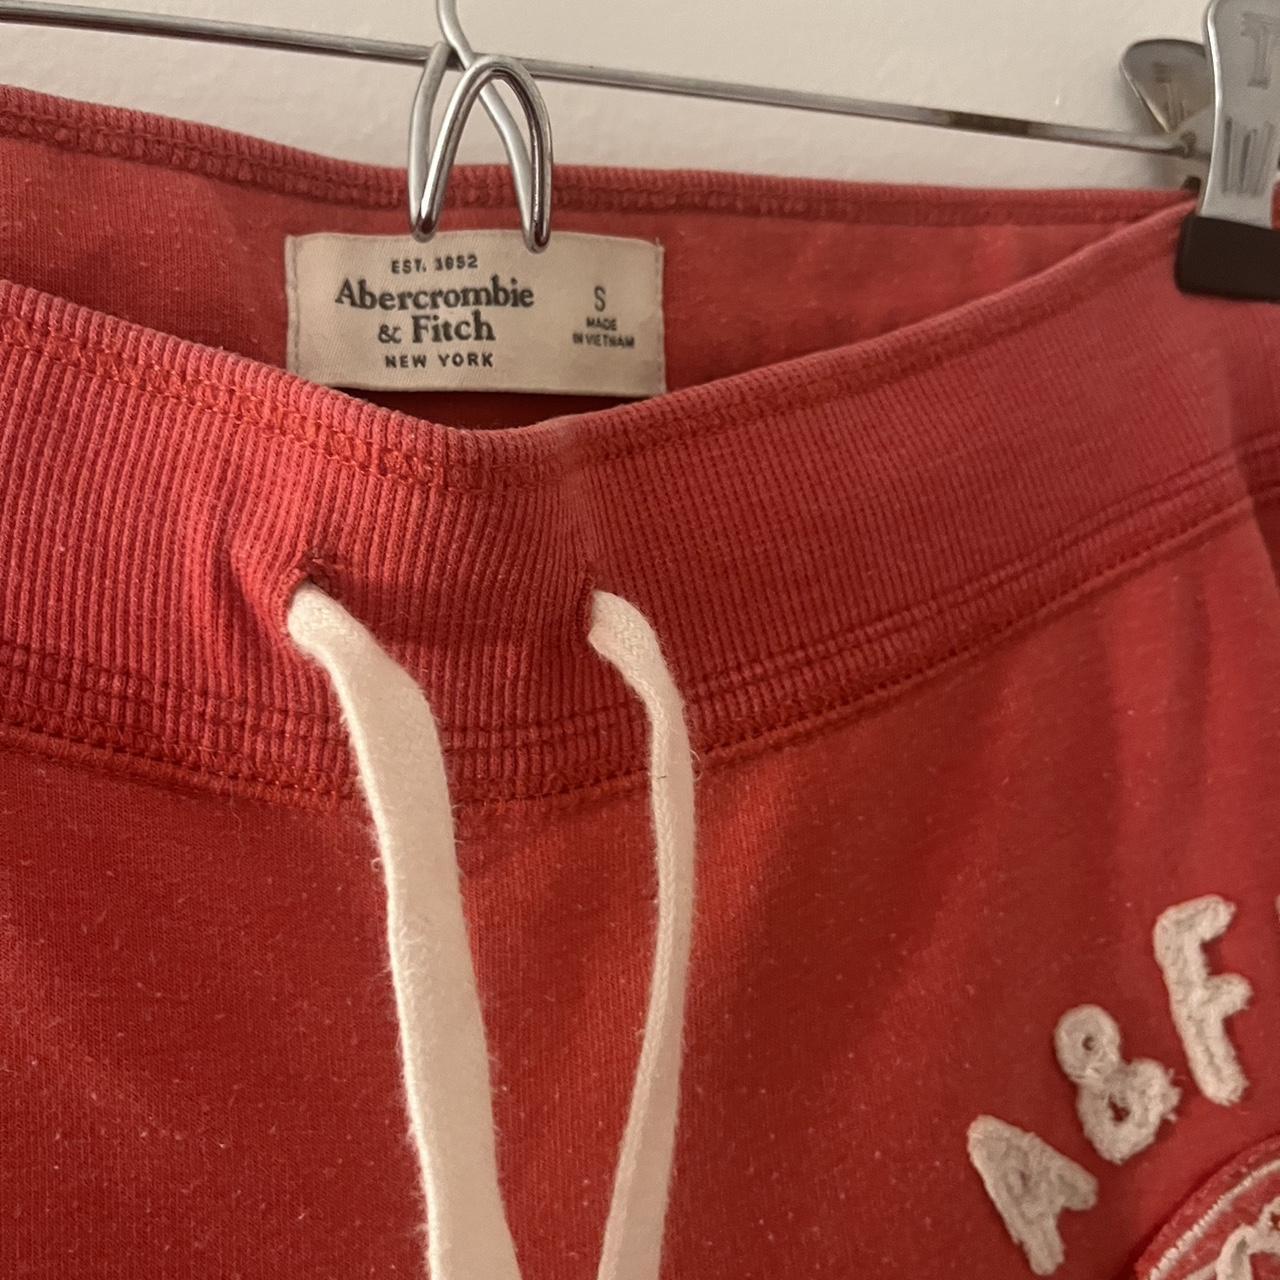 Abercrombie & Fitch Sweatpants - Low Rise: Red Activewear - Size